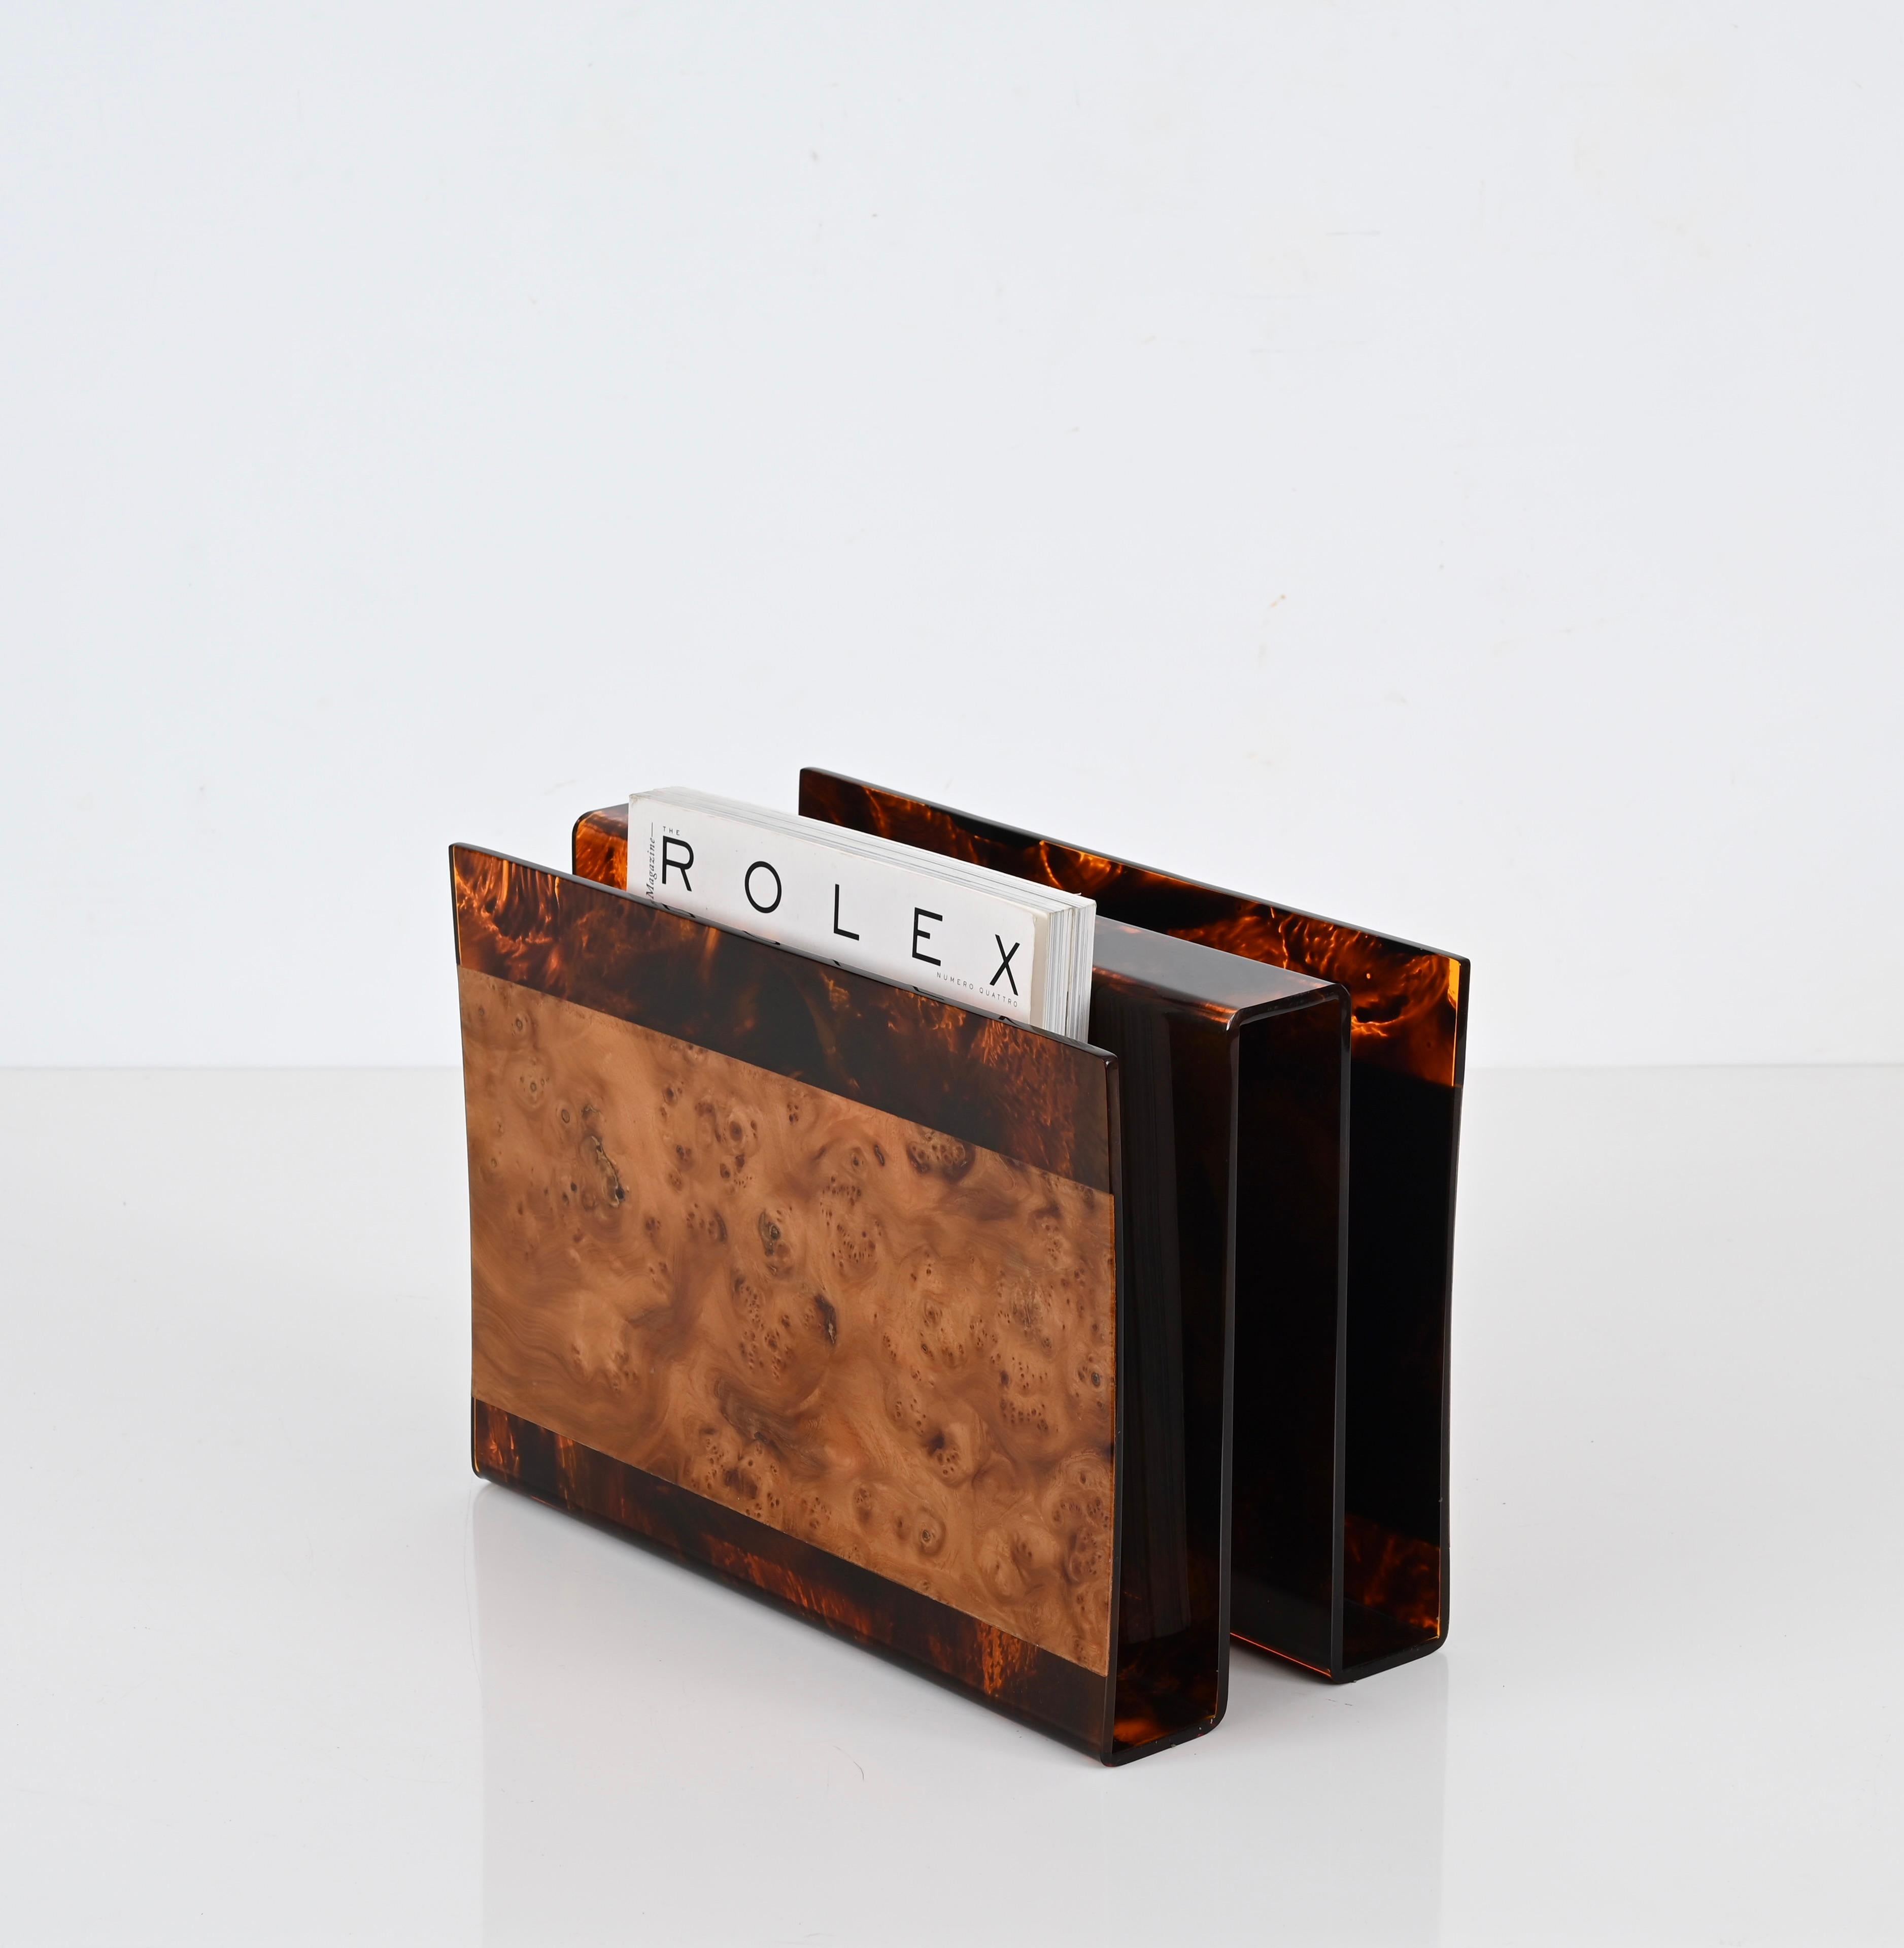 Gorgeous magazine rack in lucite with a stunning tortoiseshell effect and briar. This incredibly elegant piece was designed by Guzzini in Italy in the 1970s.

This incredibly charming magazine rack has been beautifully crafted mixing a lovely lucite